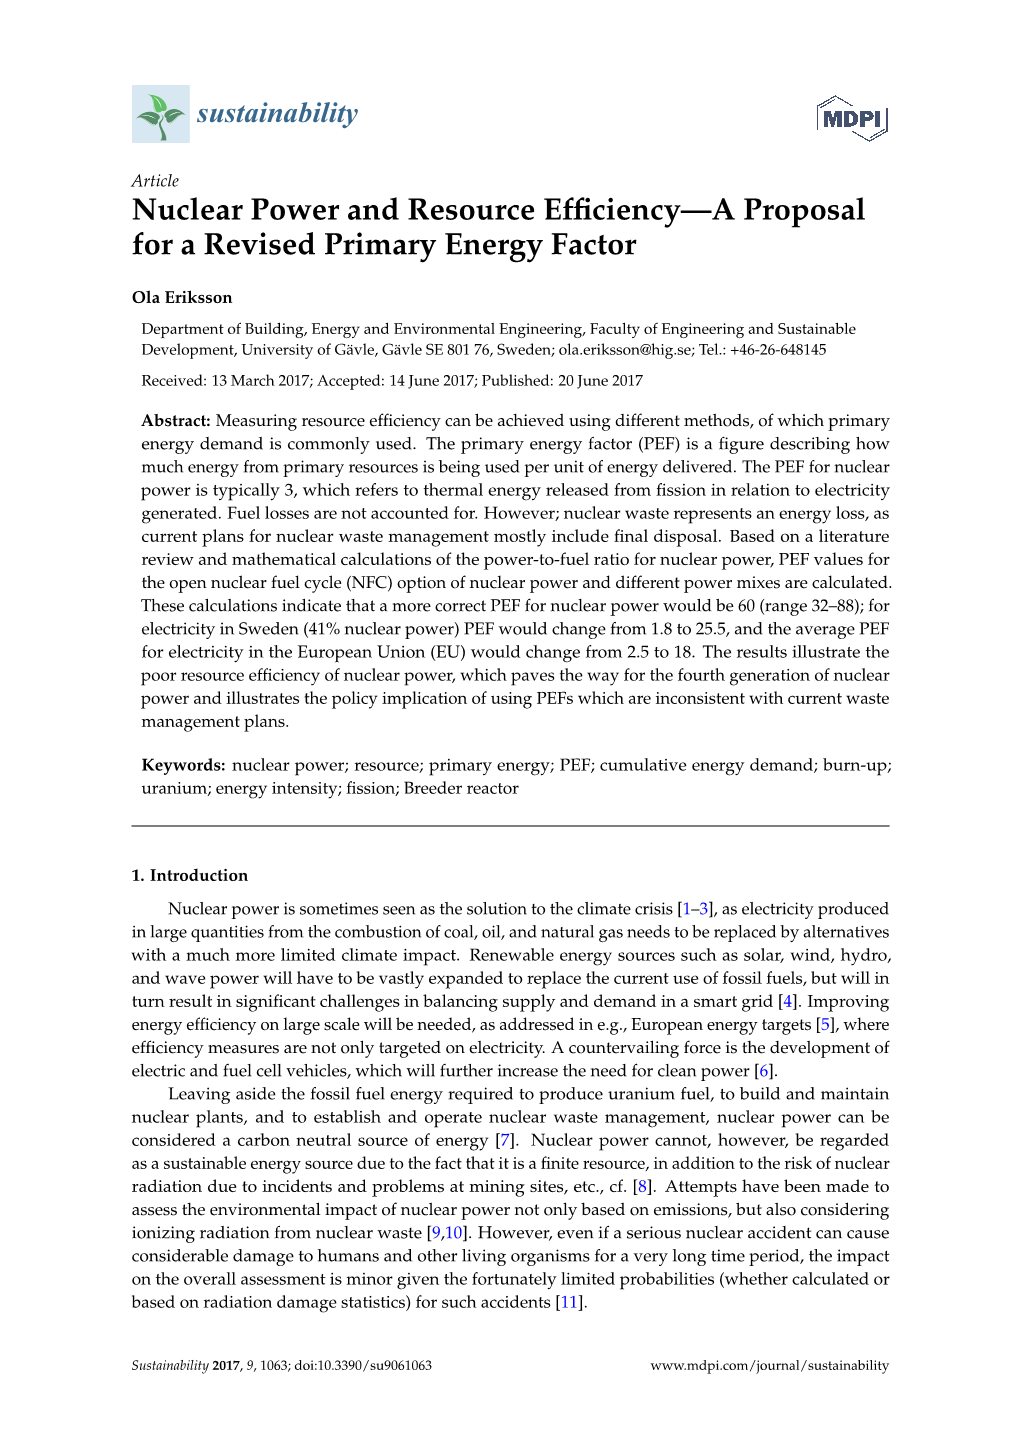 Nuclear Power and Resource Efficiency—A Proposal for A